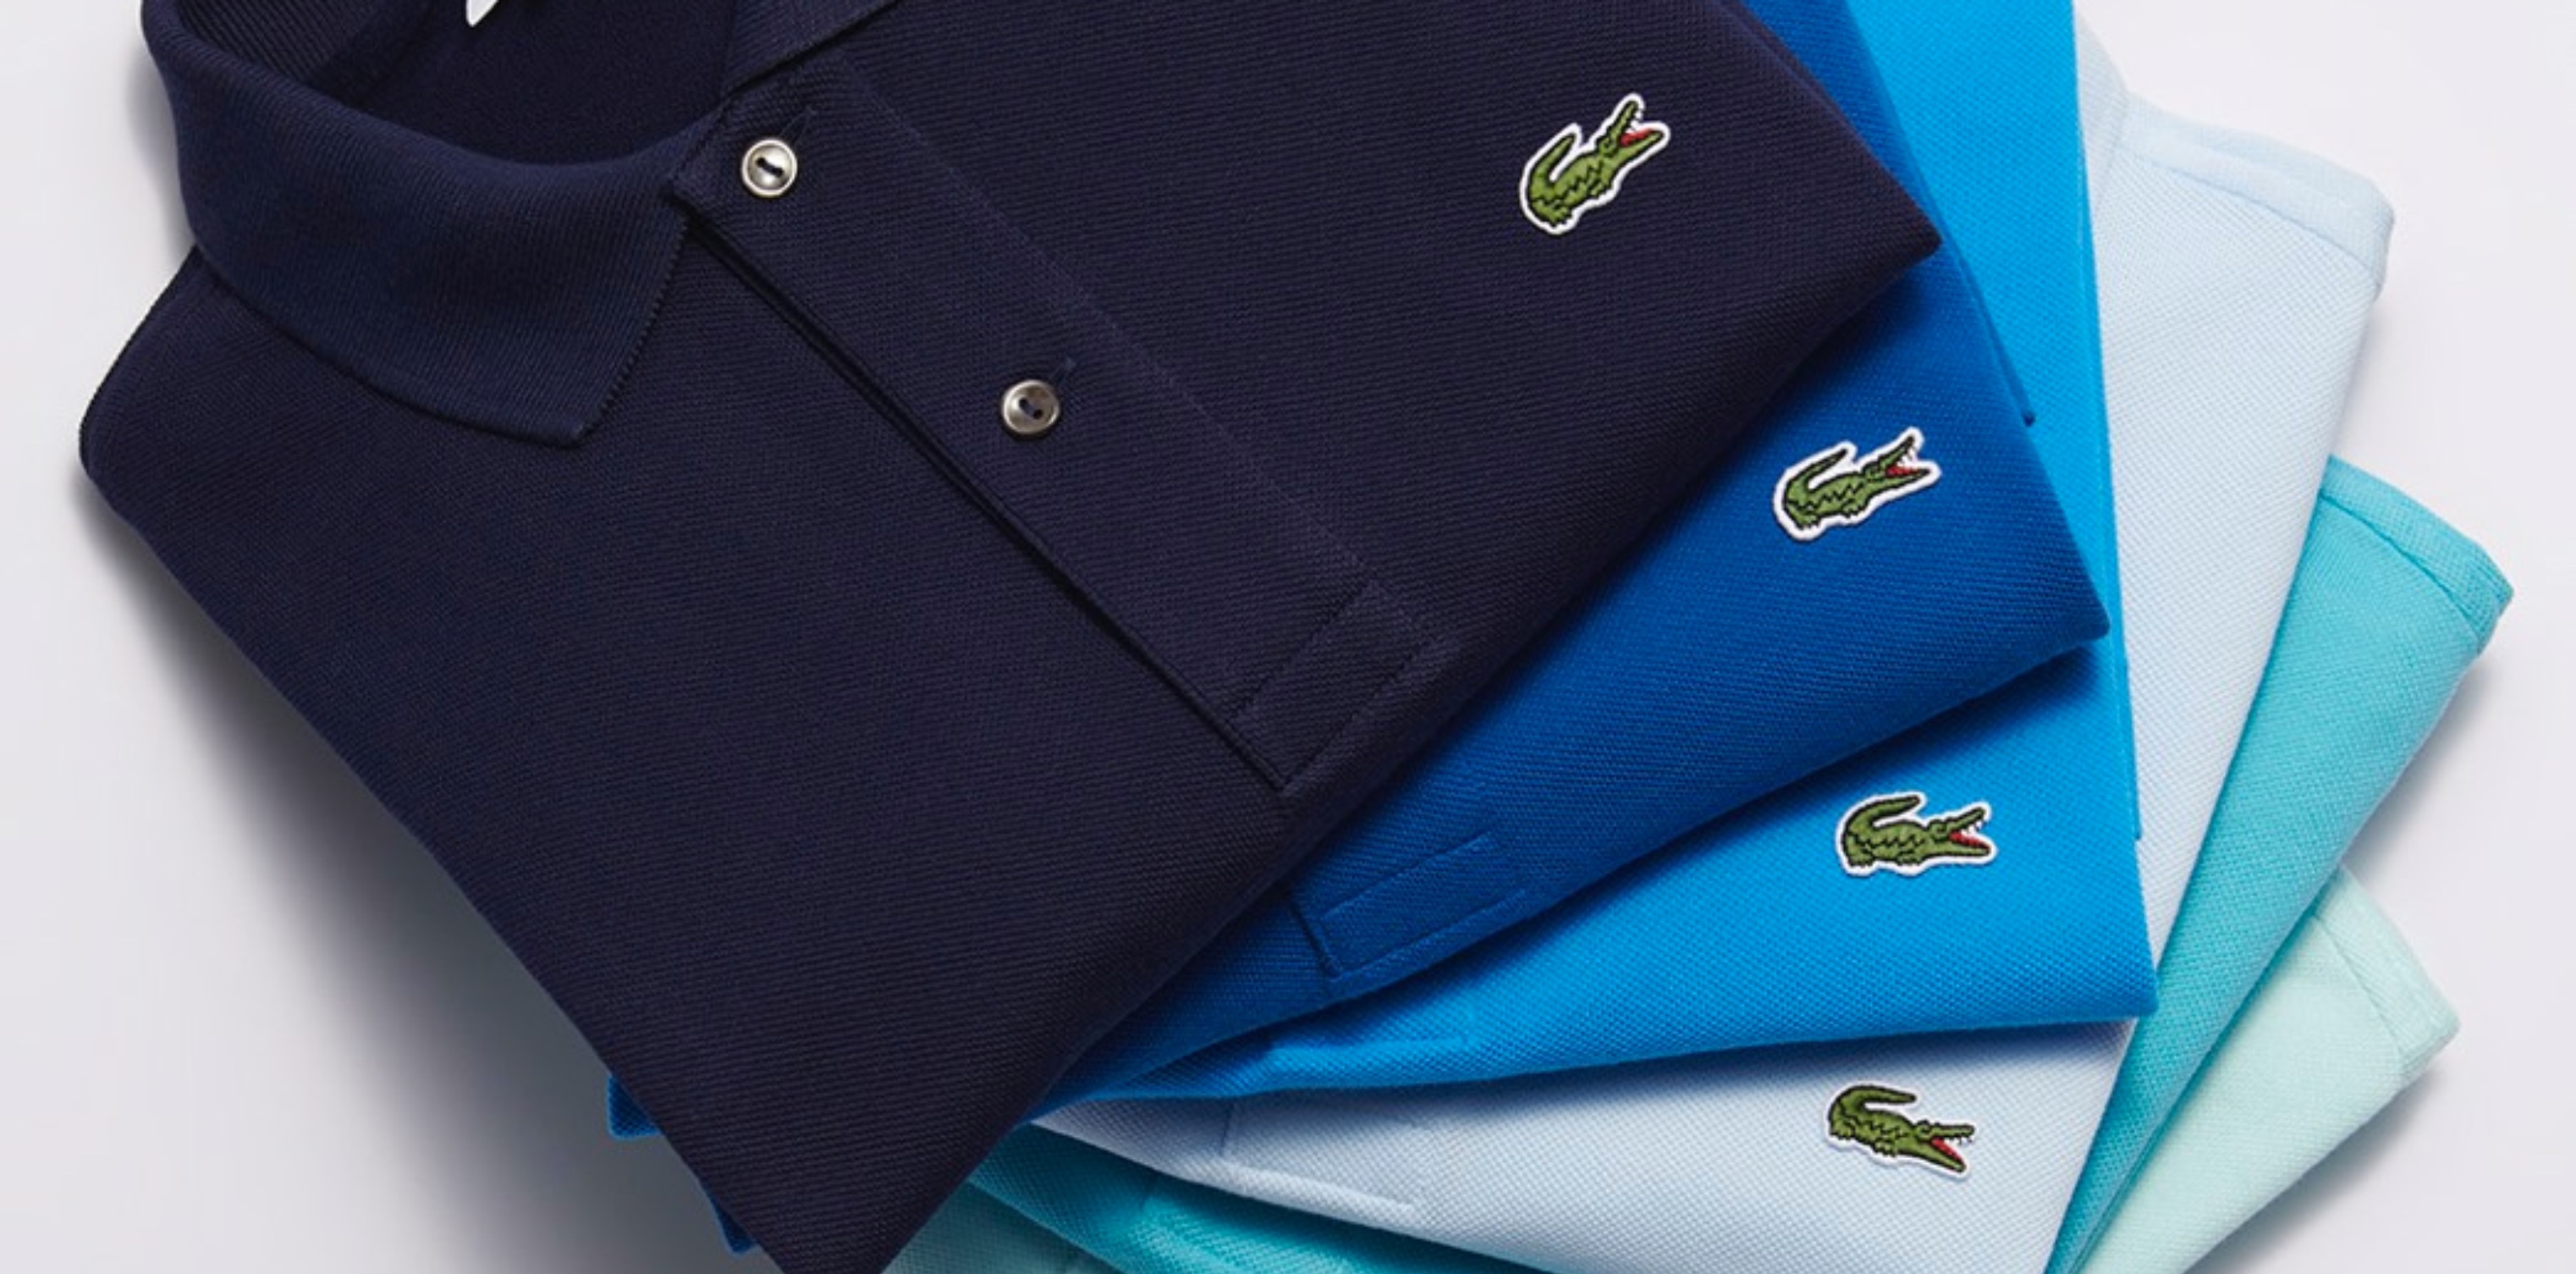 Lacoste takes up to 50% t-shirts, polos, sweatshirts, more from $7